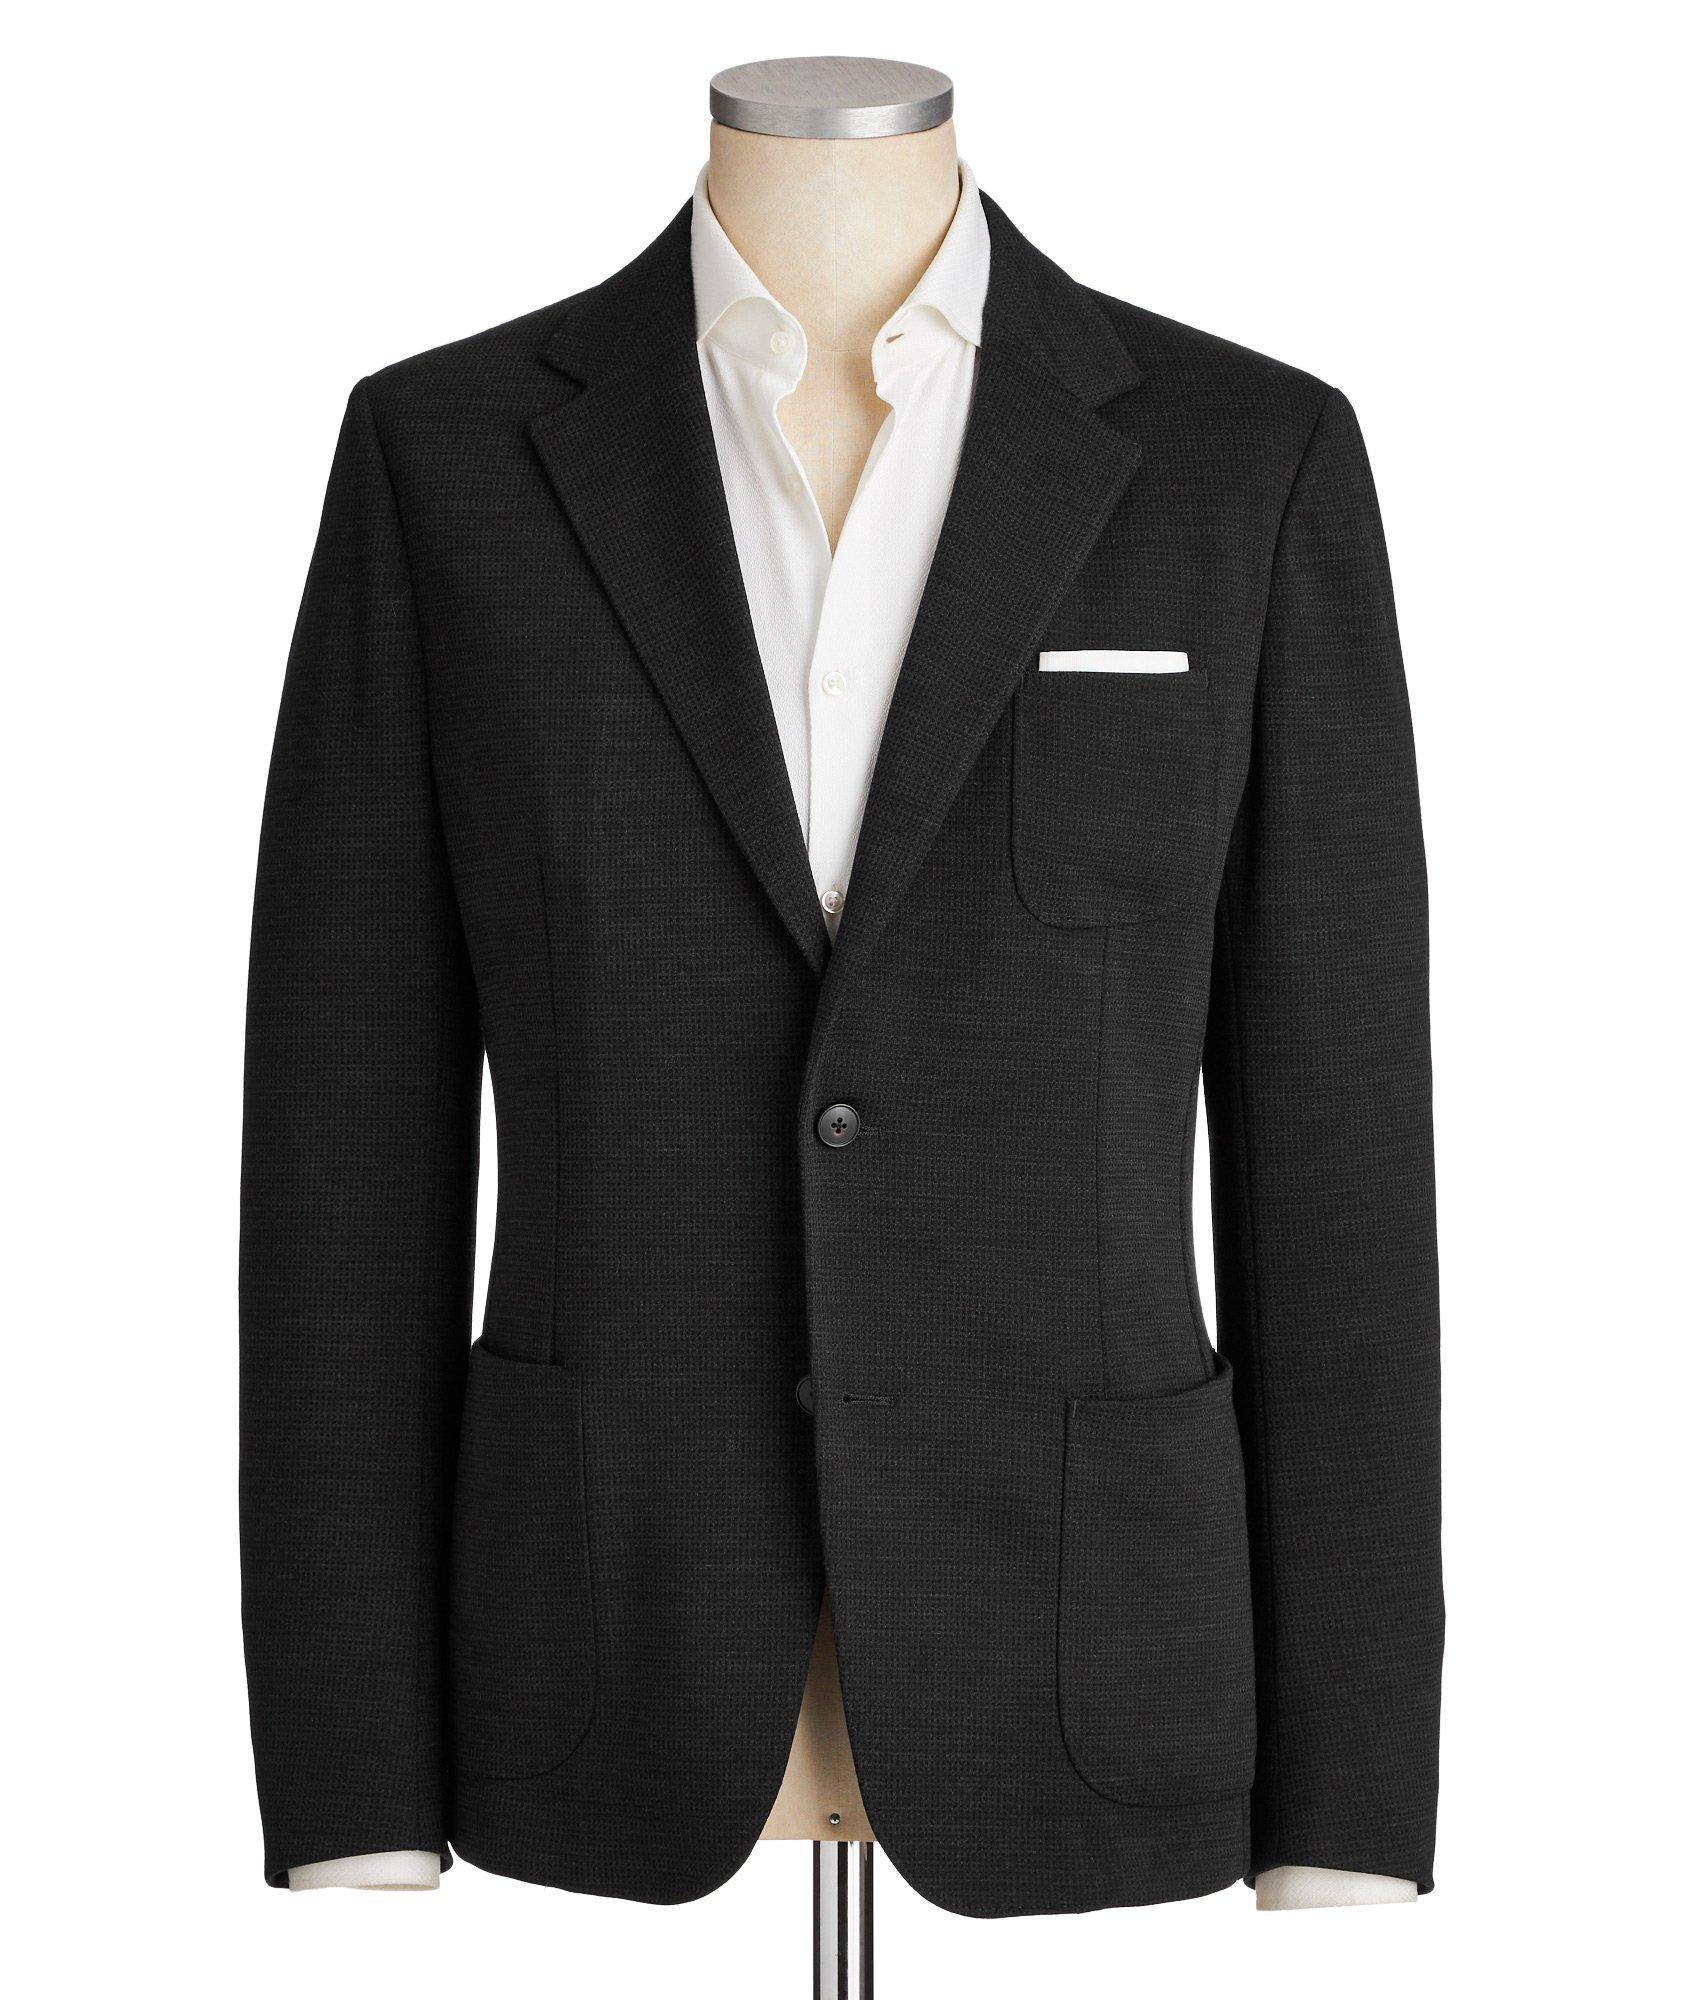 Drop 8 Unstructured Sports Jacket image 0